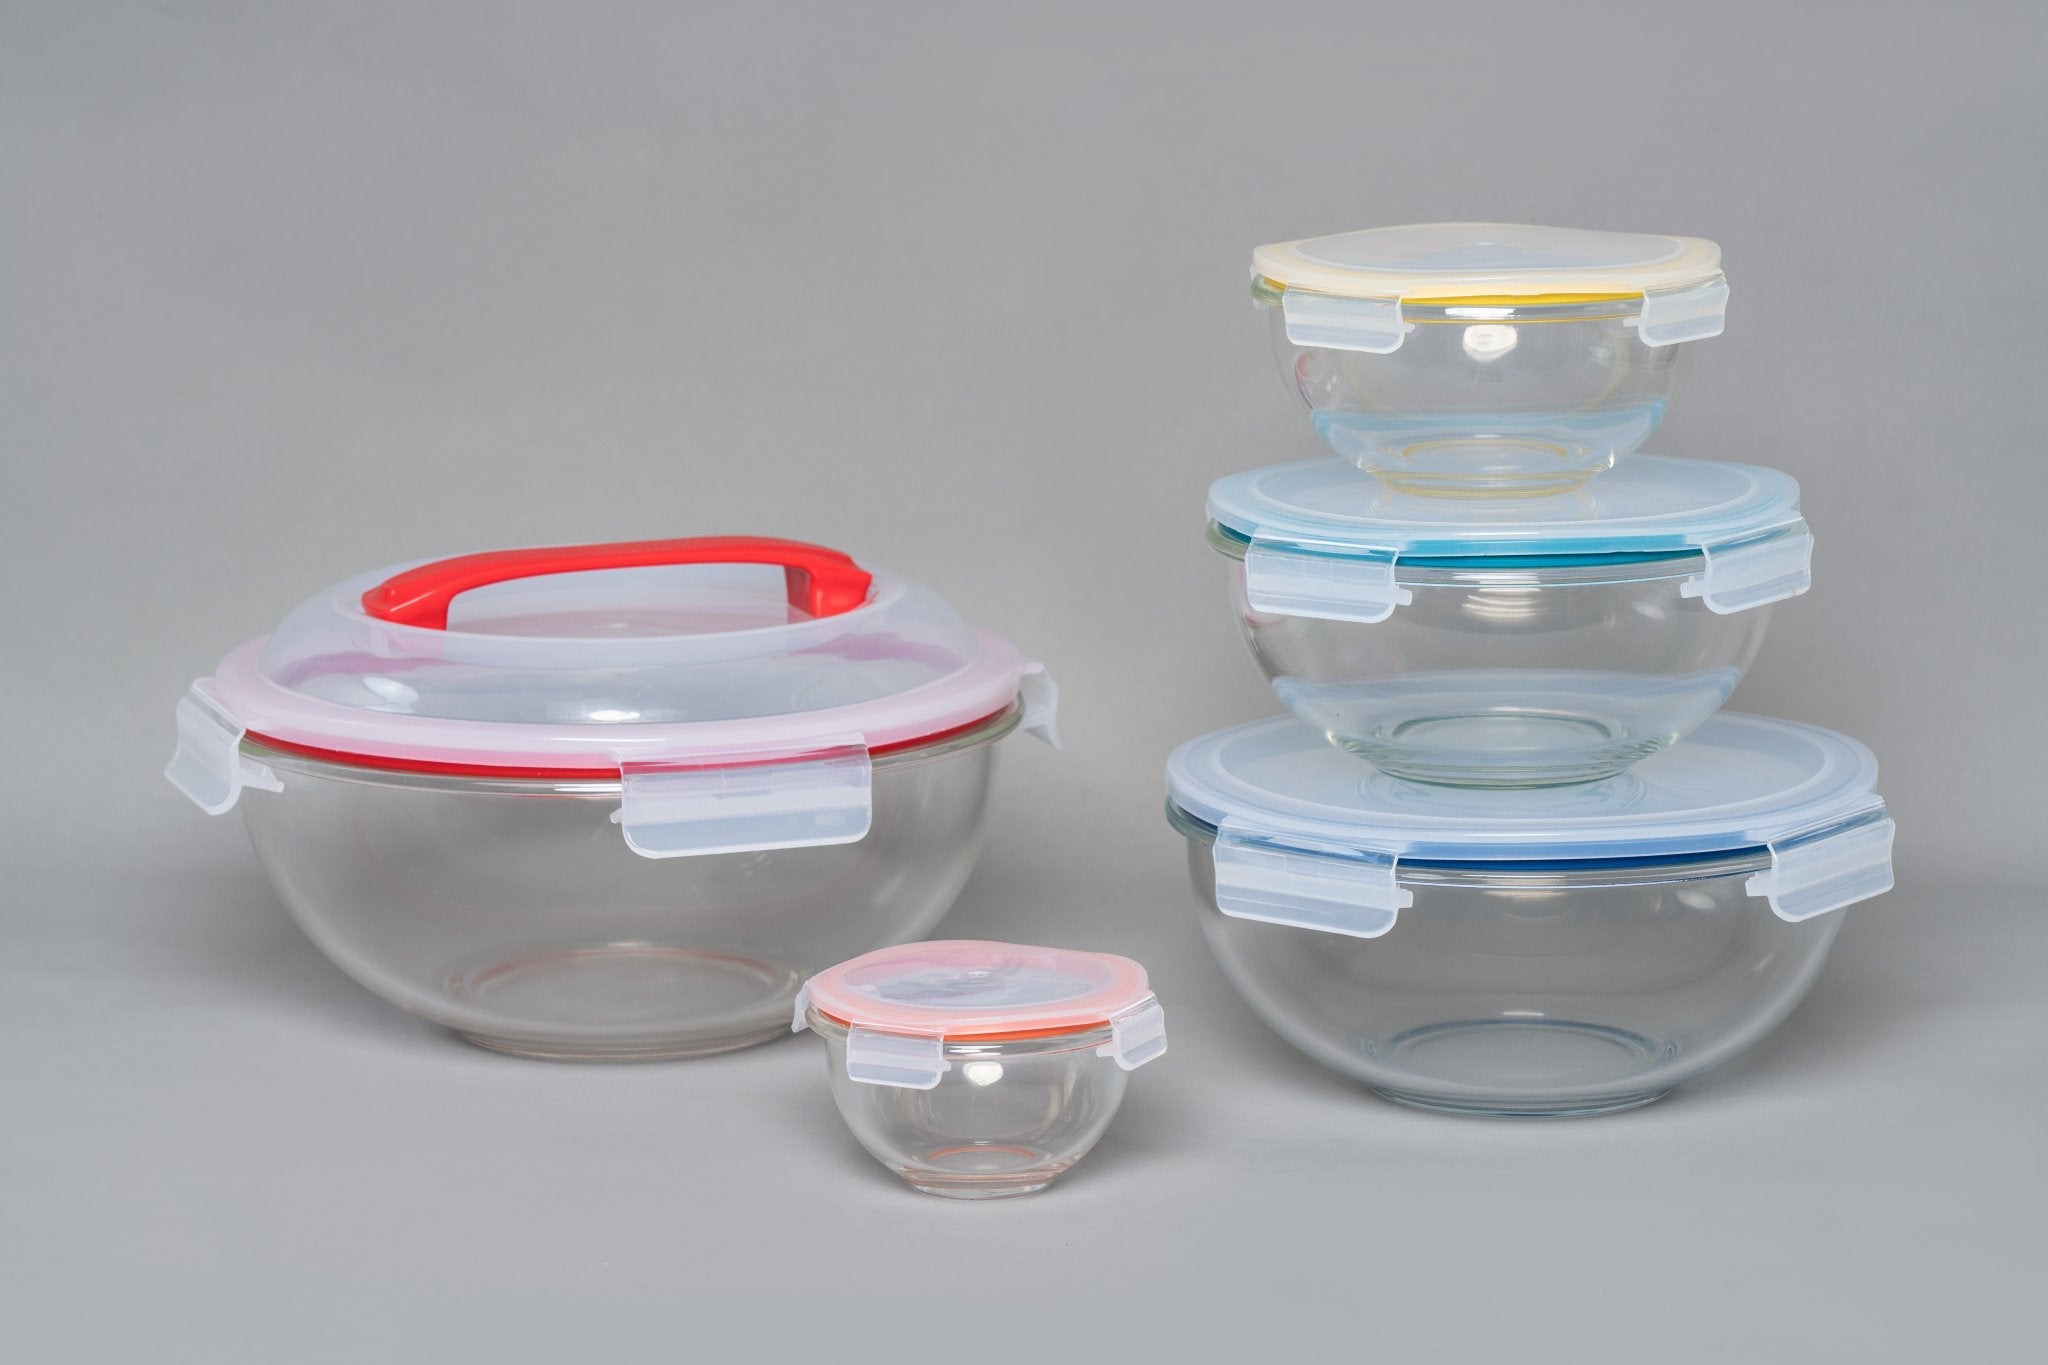 https://genicook.com/cdn/shop/products/5-container-nesting-borosilicate-glass-mixing-bowl-set-with-locking-lids-and-carry-handlegenicookmxl1001-333292.jpg?v=1678244396